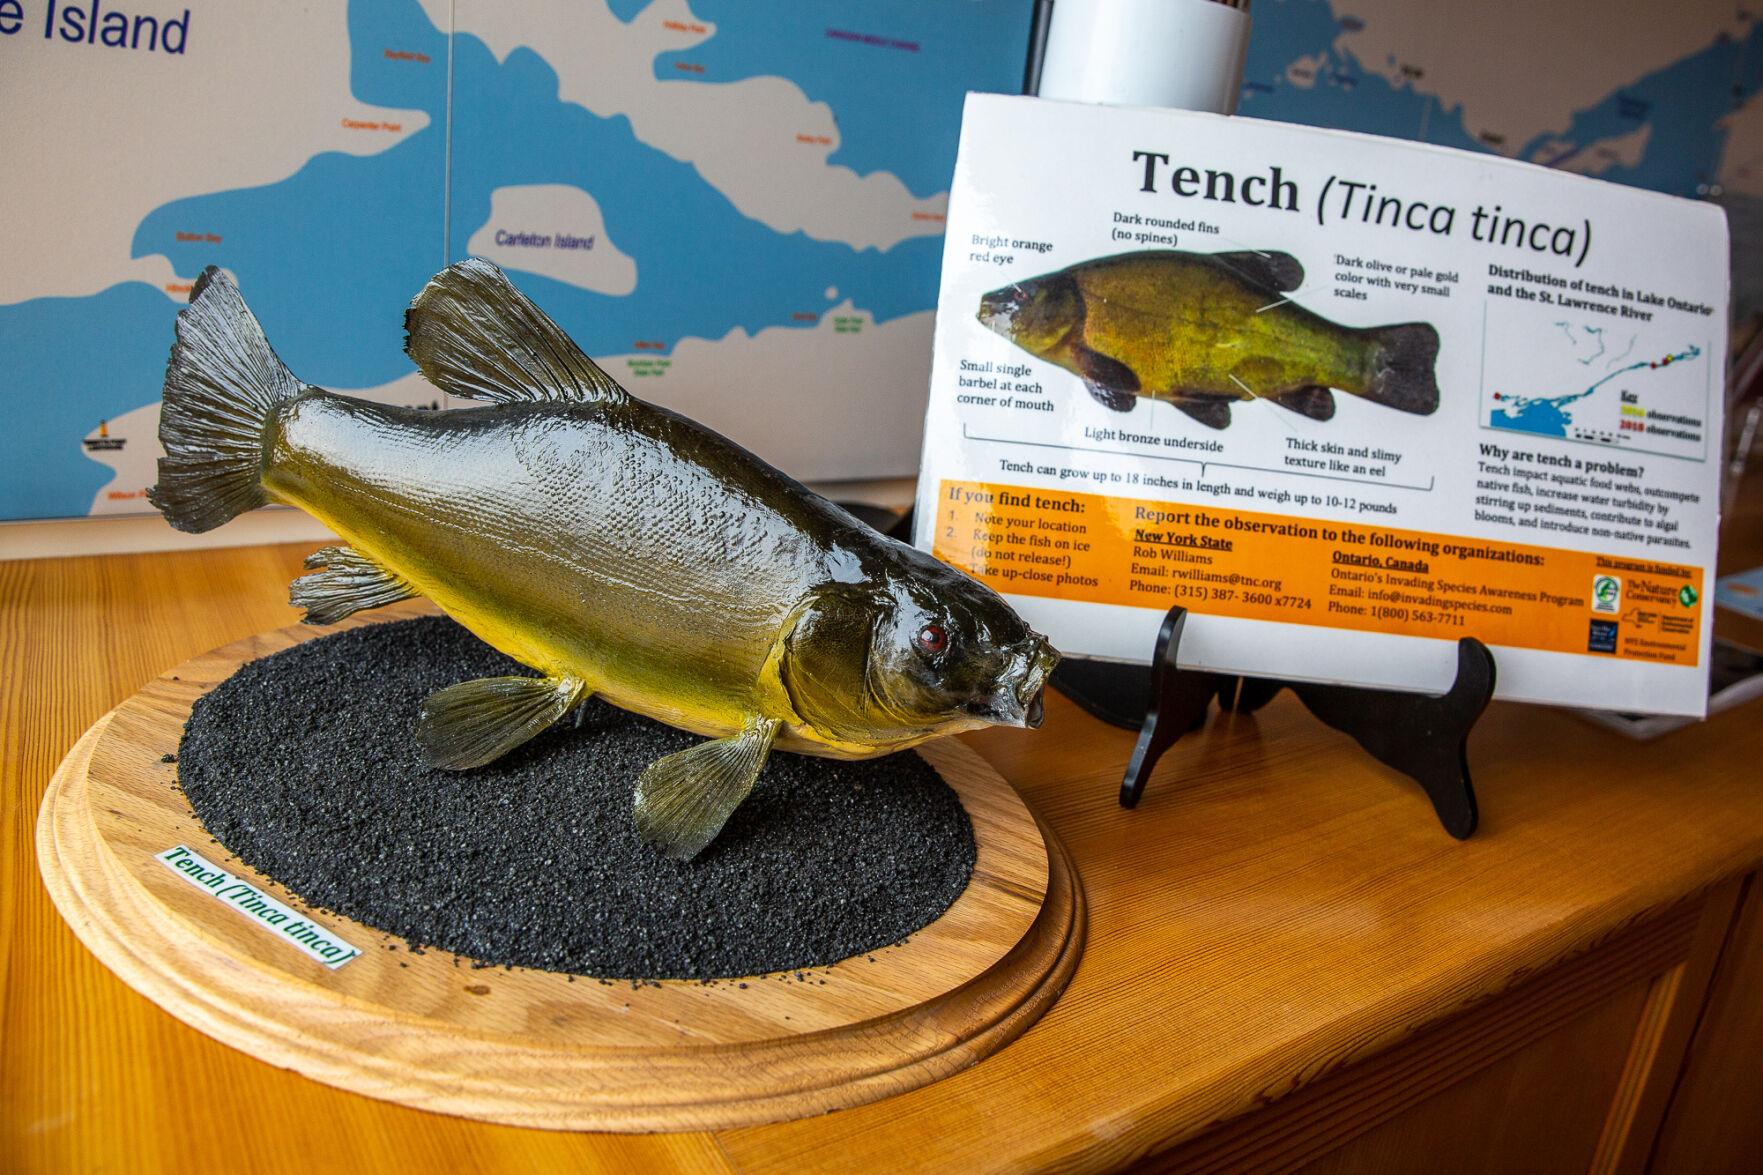 Discovery Raises Awareness Of Preventing Tench From Becoming Entrenched 